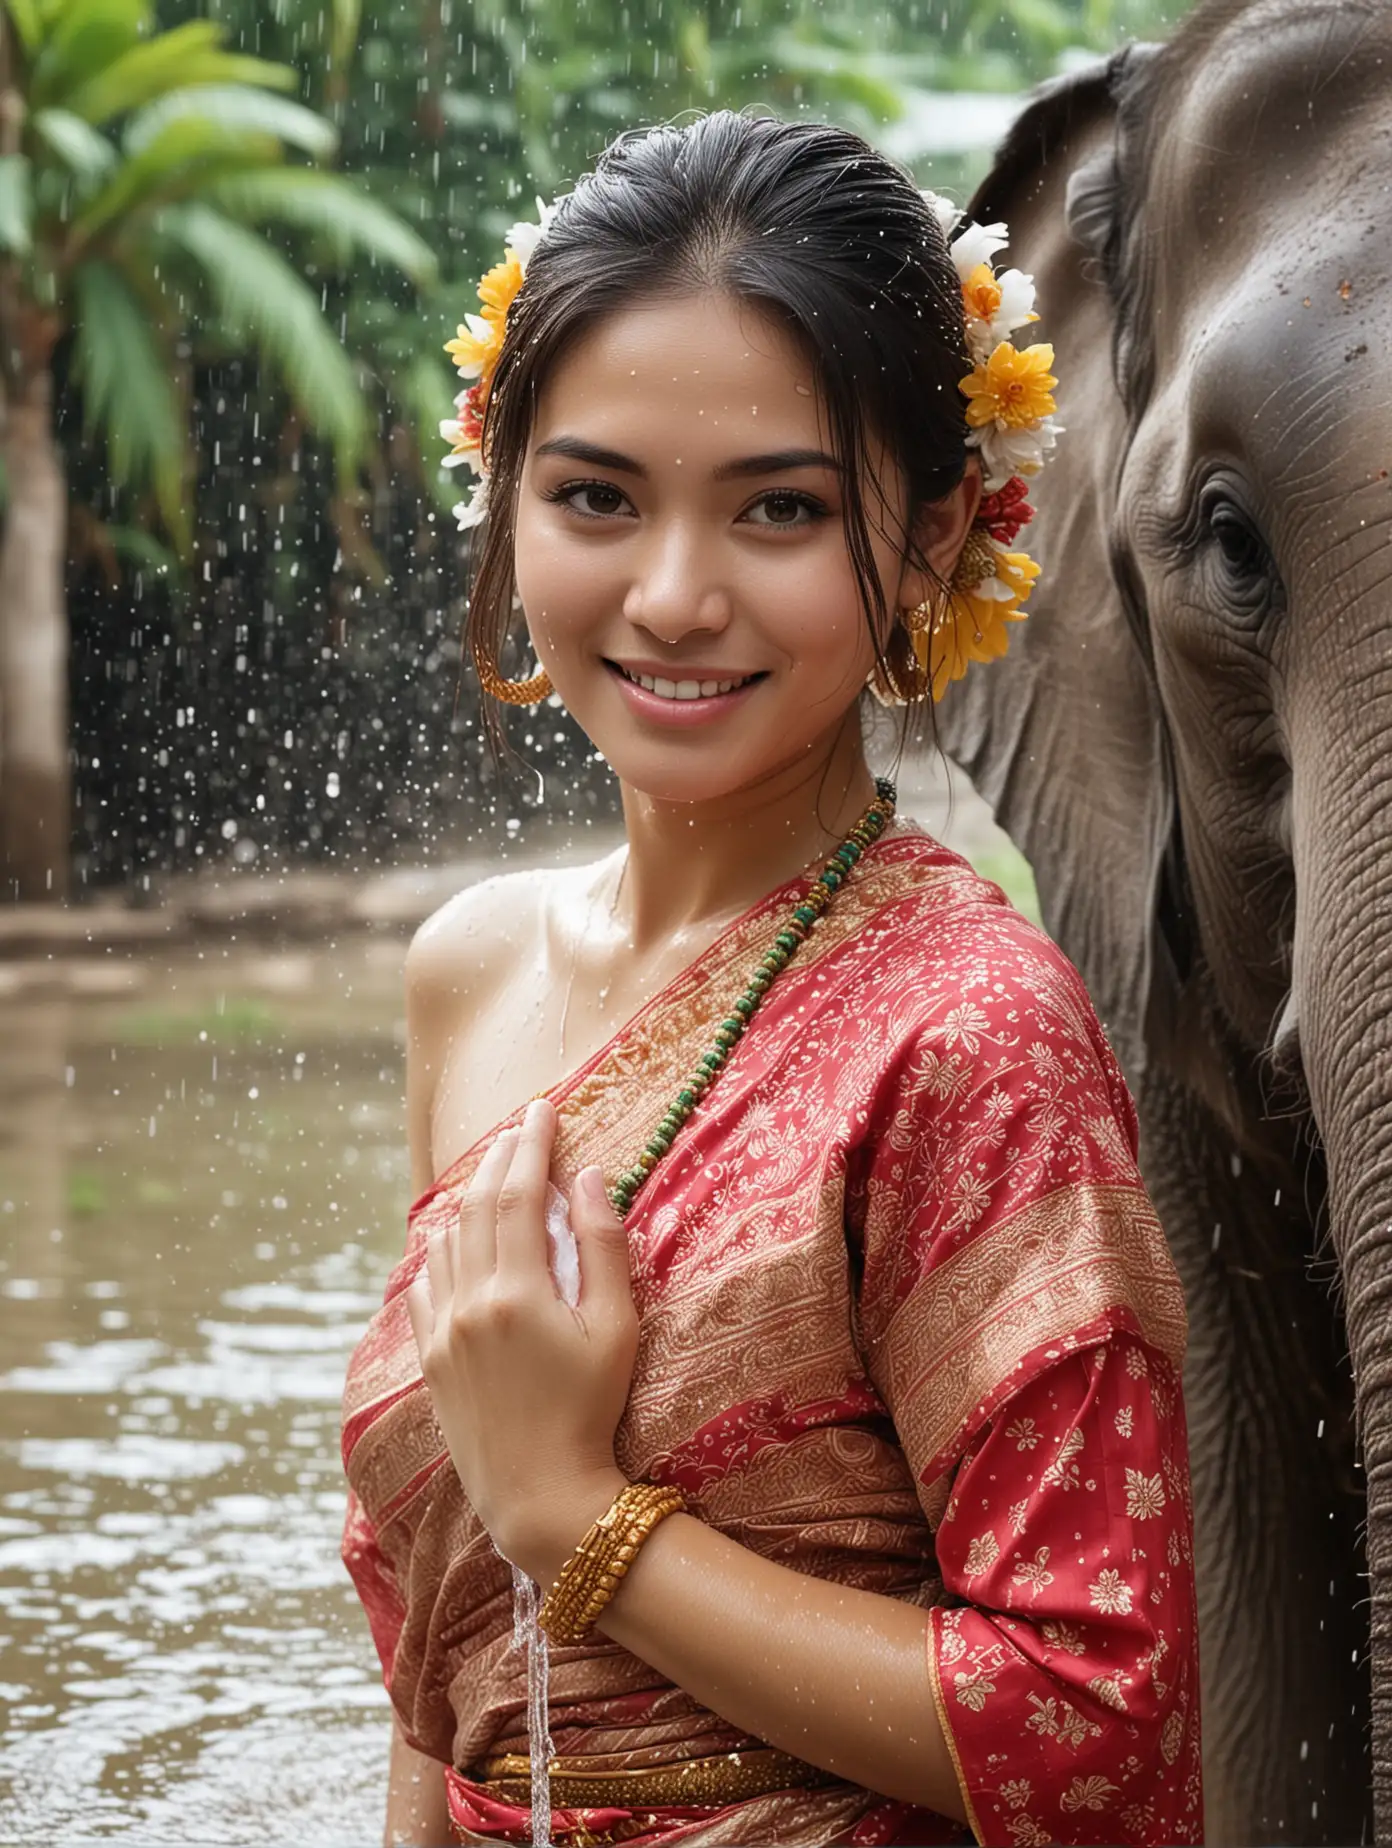 Thai girl model,, dressed in traditional Thai clothes, with a strong festive atmosphere, Elephant， holding water , facing the camera, joyfully splashing each other with water during the New Year celebration, water droplets splashing on her face, exquisite facial features, Thailand Water Songkran scene, with coconut trees in the background, water splashing violently in front of the camera, strong lens sense，full-body shot